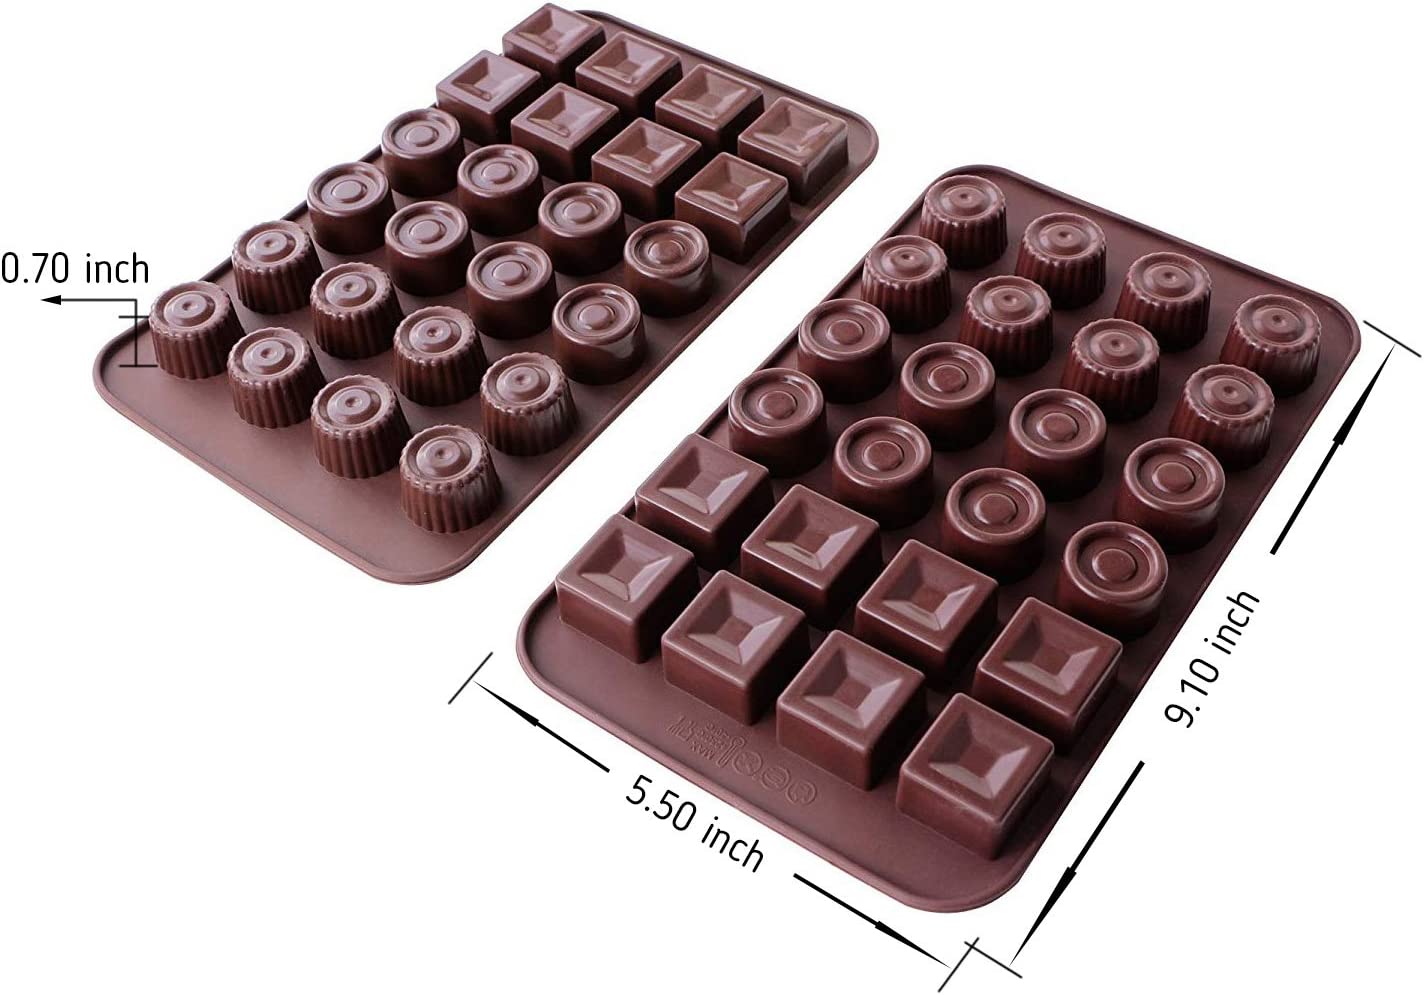 Webake Chocolate Molds Silicone Candy Molds for Gummy, Keto Fat Bombs